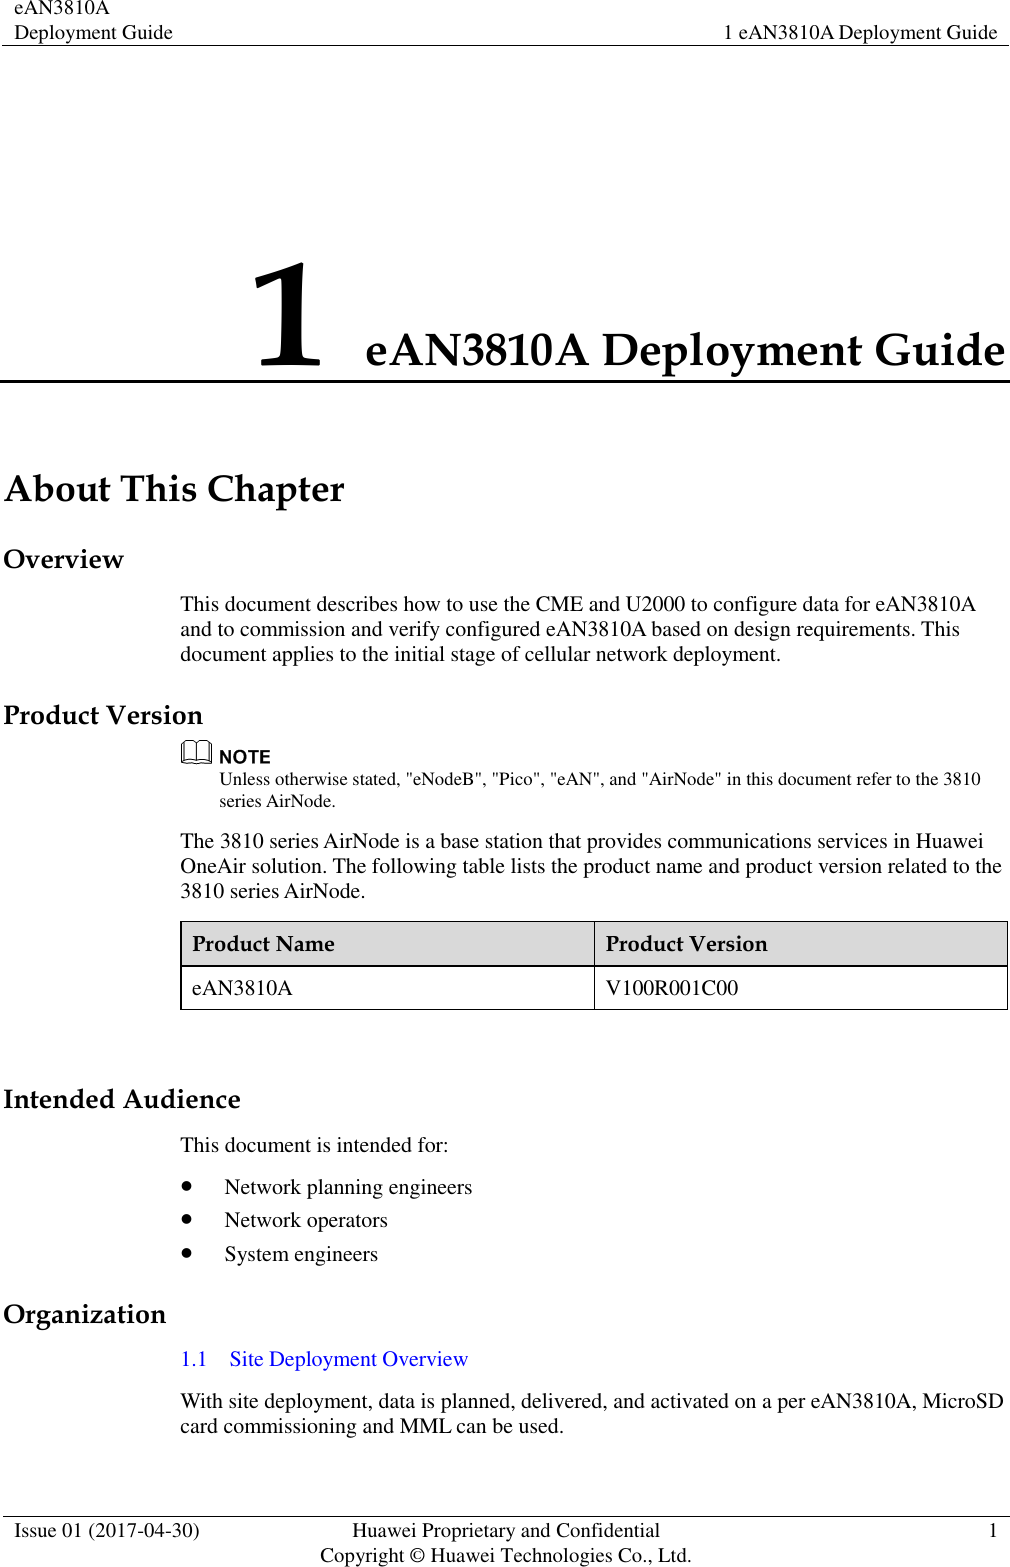 eAN3810A Deployment Guide 1 eAN3810A Deployment Guide  Issue 01 (2017-04-30) Huawei Proprietary and Confidential                                     Copyright © Huawei Technologies Co., Ltd. 1  1 eAN3810A Deployment Guide About This Chapter Overview This document describes how to use the CME and U2000 to configure data for eAN3810A and to commission and verify configured eAN3810A based on design requirements. This document applies to the initial stage of cellular network deployment. Product Version  Unless otherwise stated, &quot;eNodeB&quot;, &quot;Pico&quot;, &quot;eAN&quot;, and &quot;AirNode&quot; in this document refer to the 3810 series AirNode.   The 3810 series AirNode is a base station that provides communications services in Huawei OneAir solution. The following table lists the product name and product version related to the 3810 series AirNode. Product Name Product Version eAN3810A V100R001C00  Intended Audience This document is intended for:    Network planning engineers  Network operators  System engineers Organization 1.1    Site Deployment Overview With site deployment, data is planned, delivered, and activated on a per eAN3810A, MicroSD card commissioning and MML can be used.   